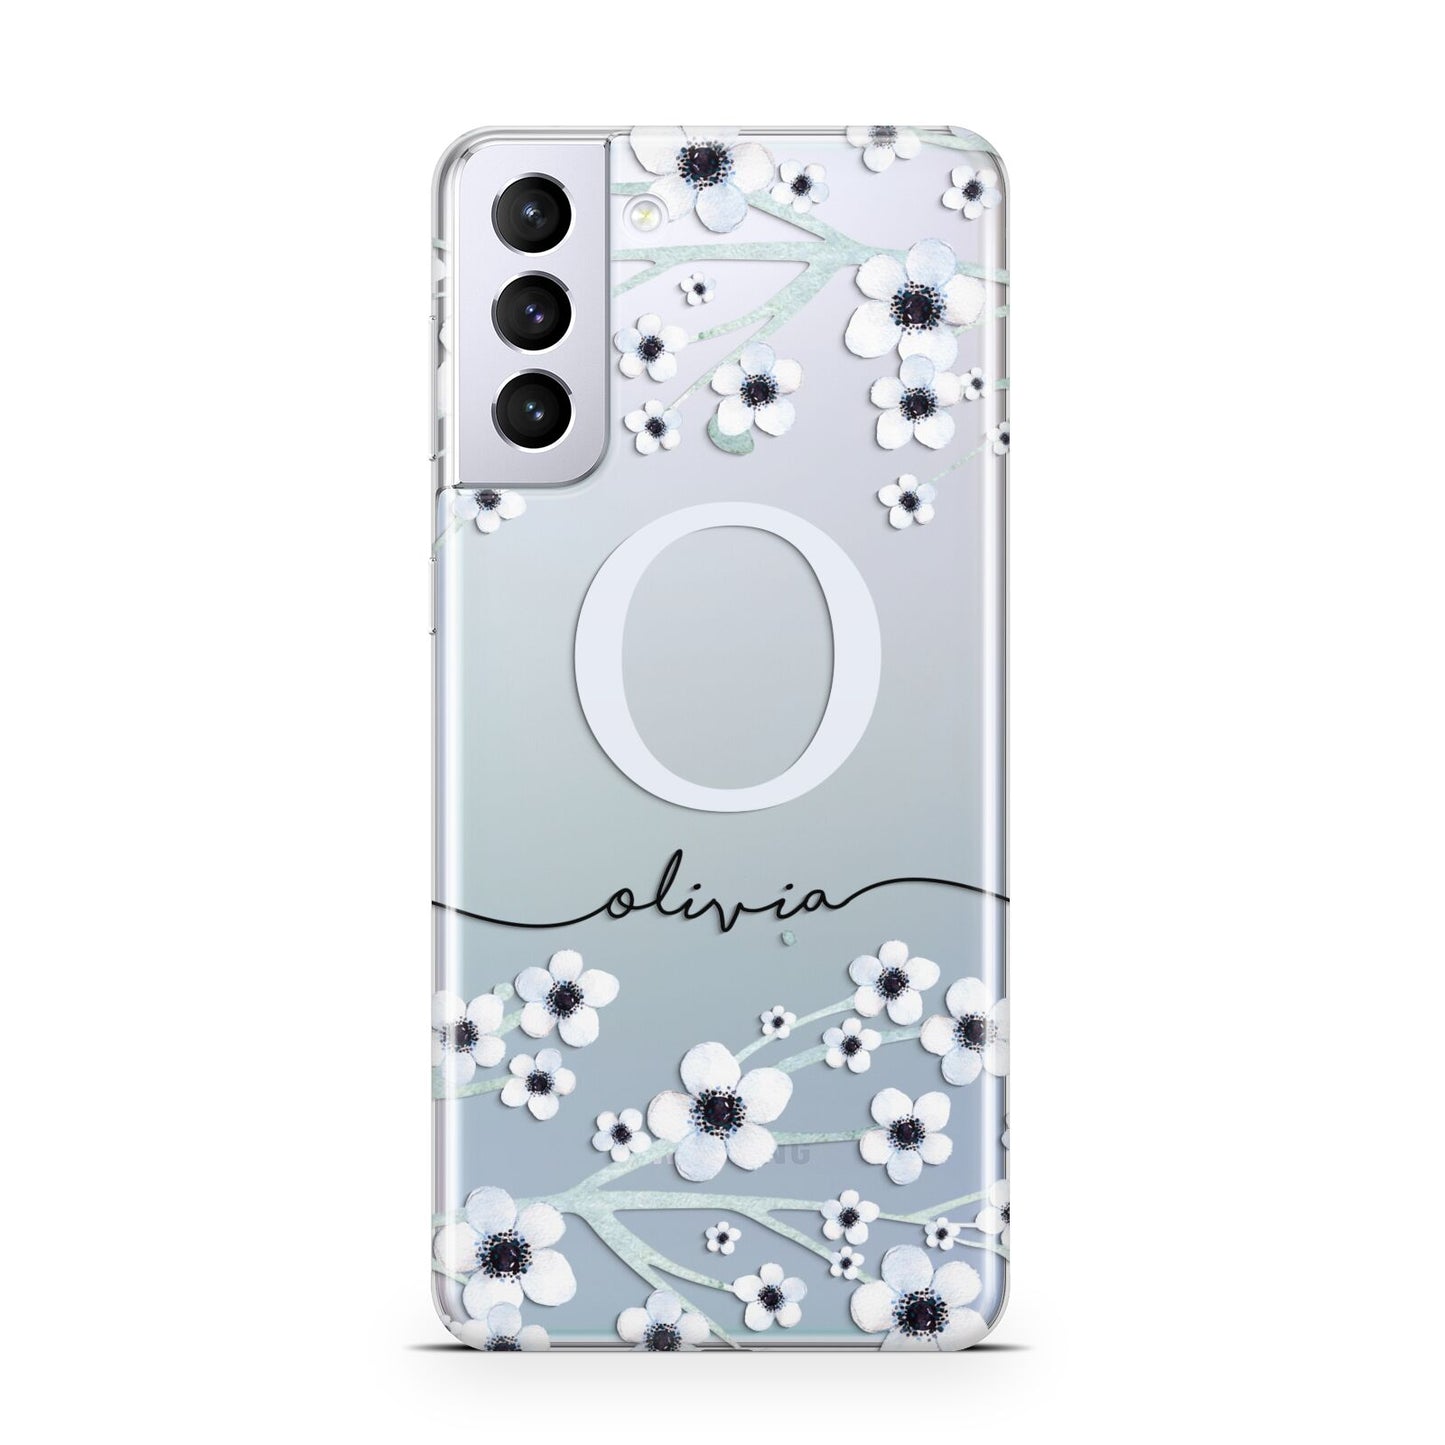 Personalised White Flower Samsung S21 Plus Case